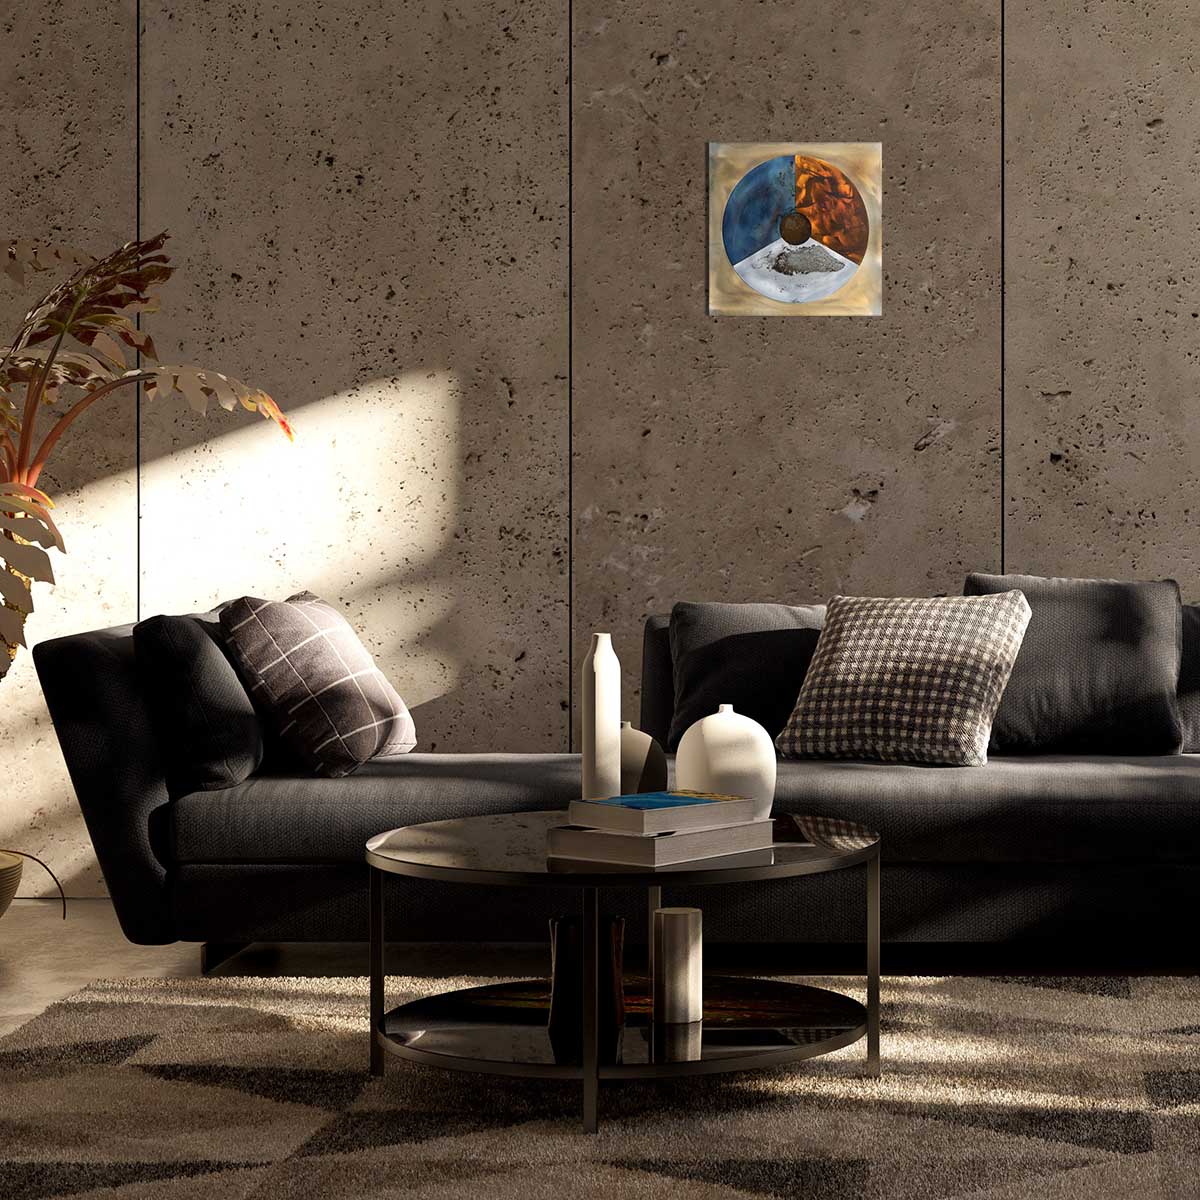 Royal Netherlands Air Force steel roundel artwork over a couch in a modern living room.